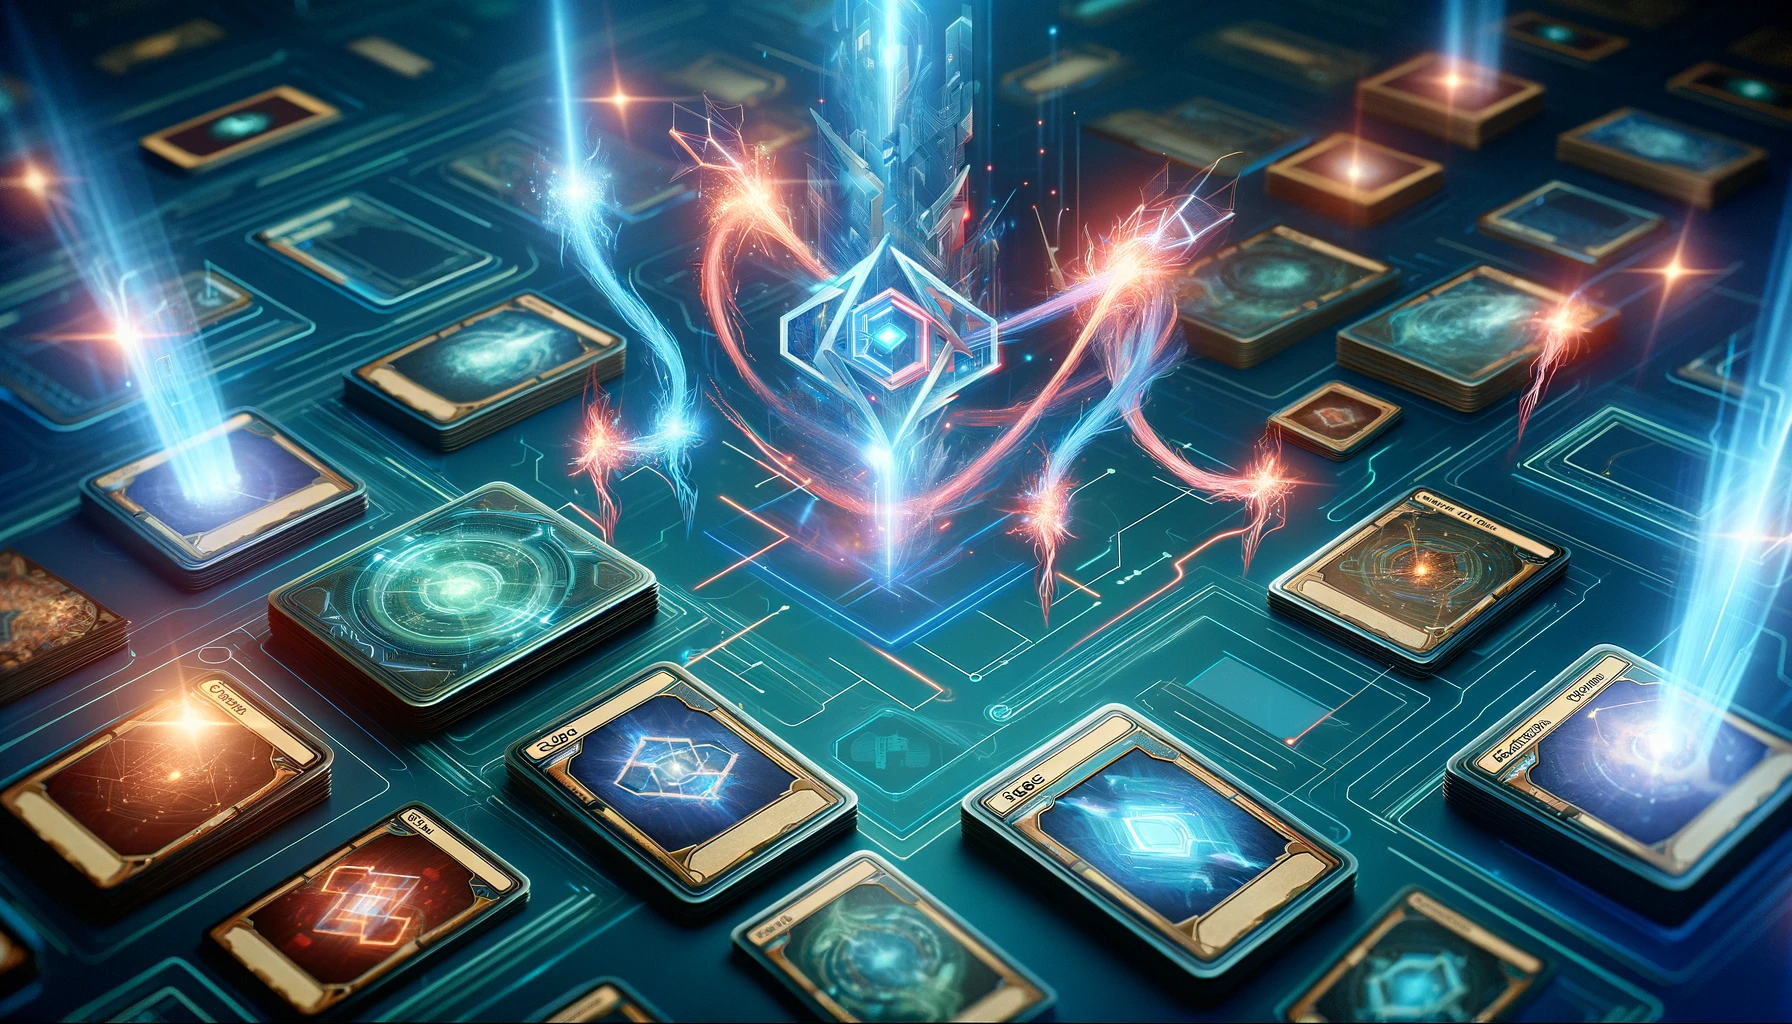 An illustration depicting the synergy of Marvel Snap cards on a futuristic, high-tech game table. Sage is shown interacting with cards like Iron Man and Black Panther, visually connected by glowing energy lines that highlight their strategic interplay.